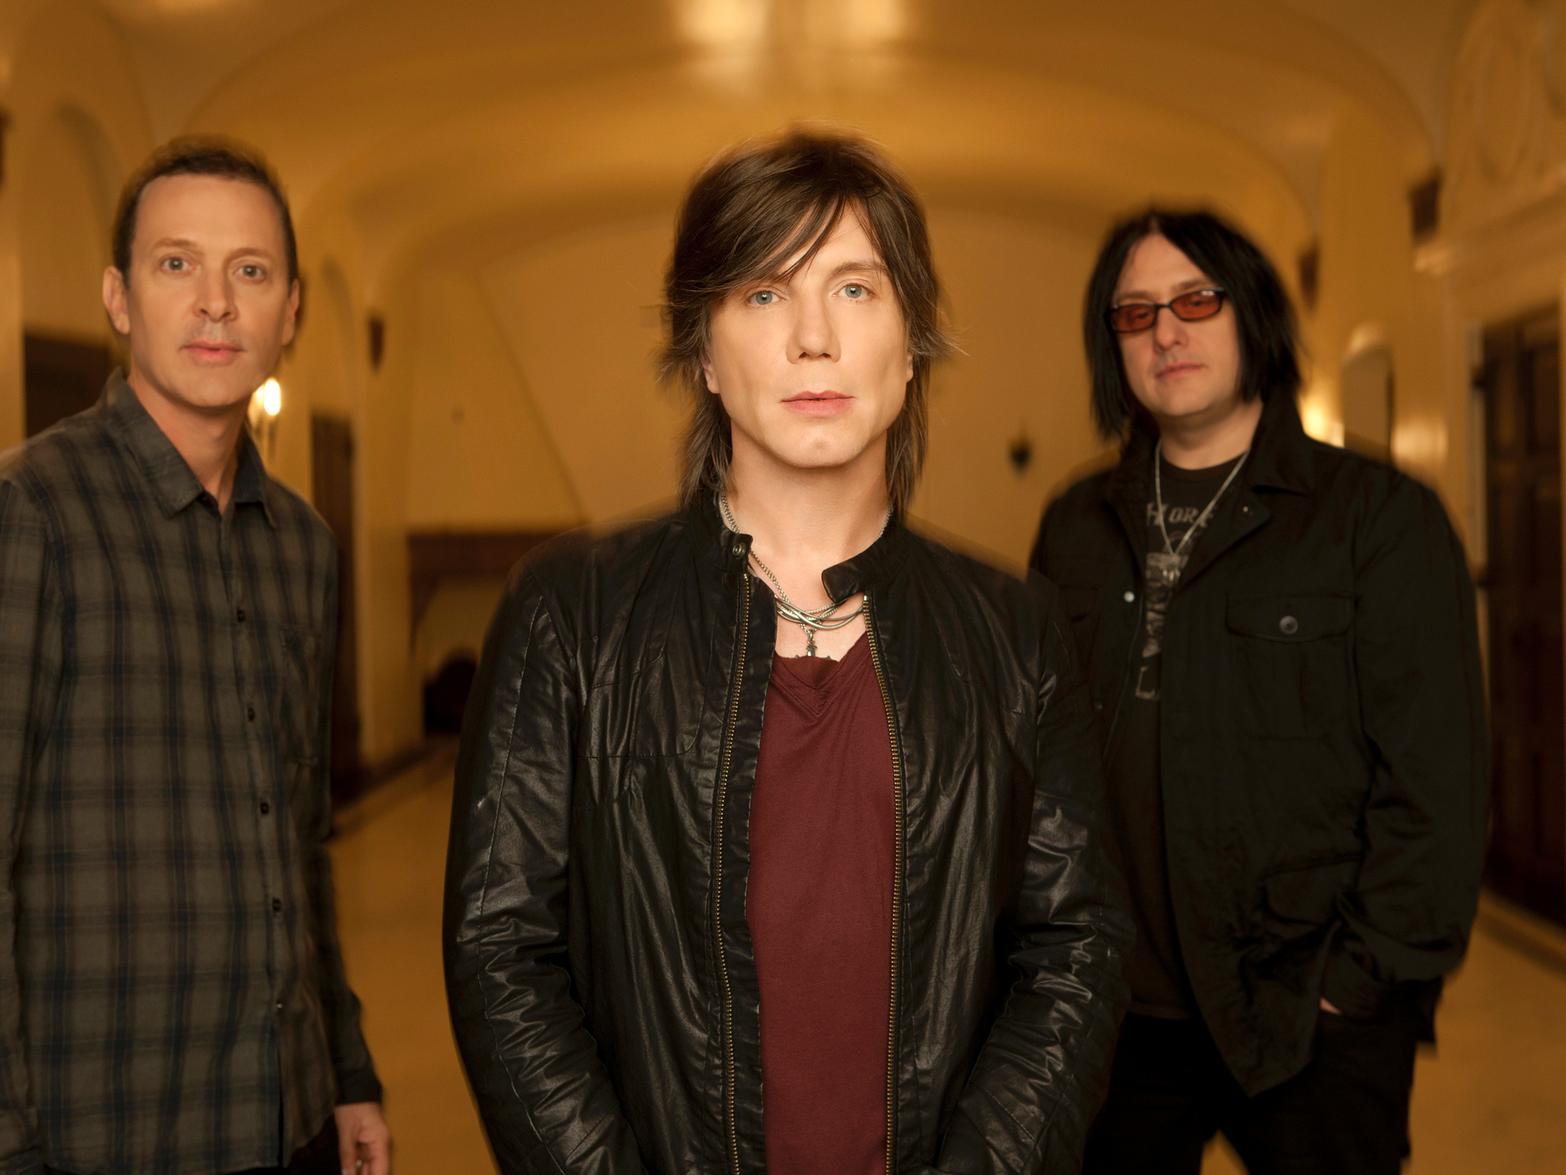 Goo Goo Dolls are taking to the academy stage in February.